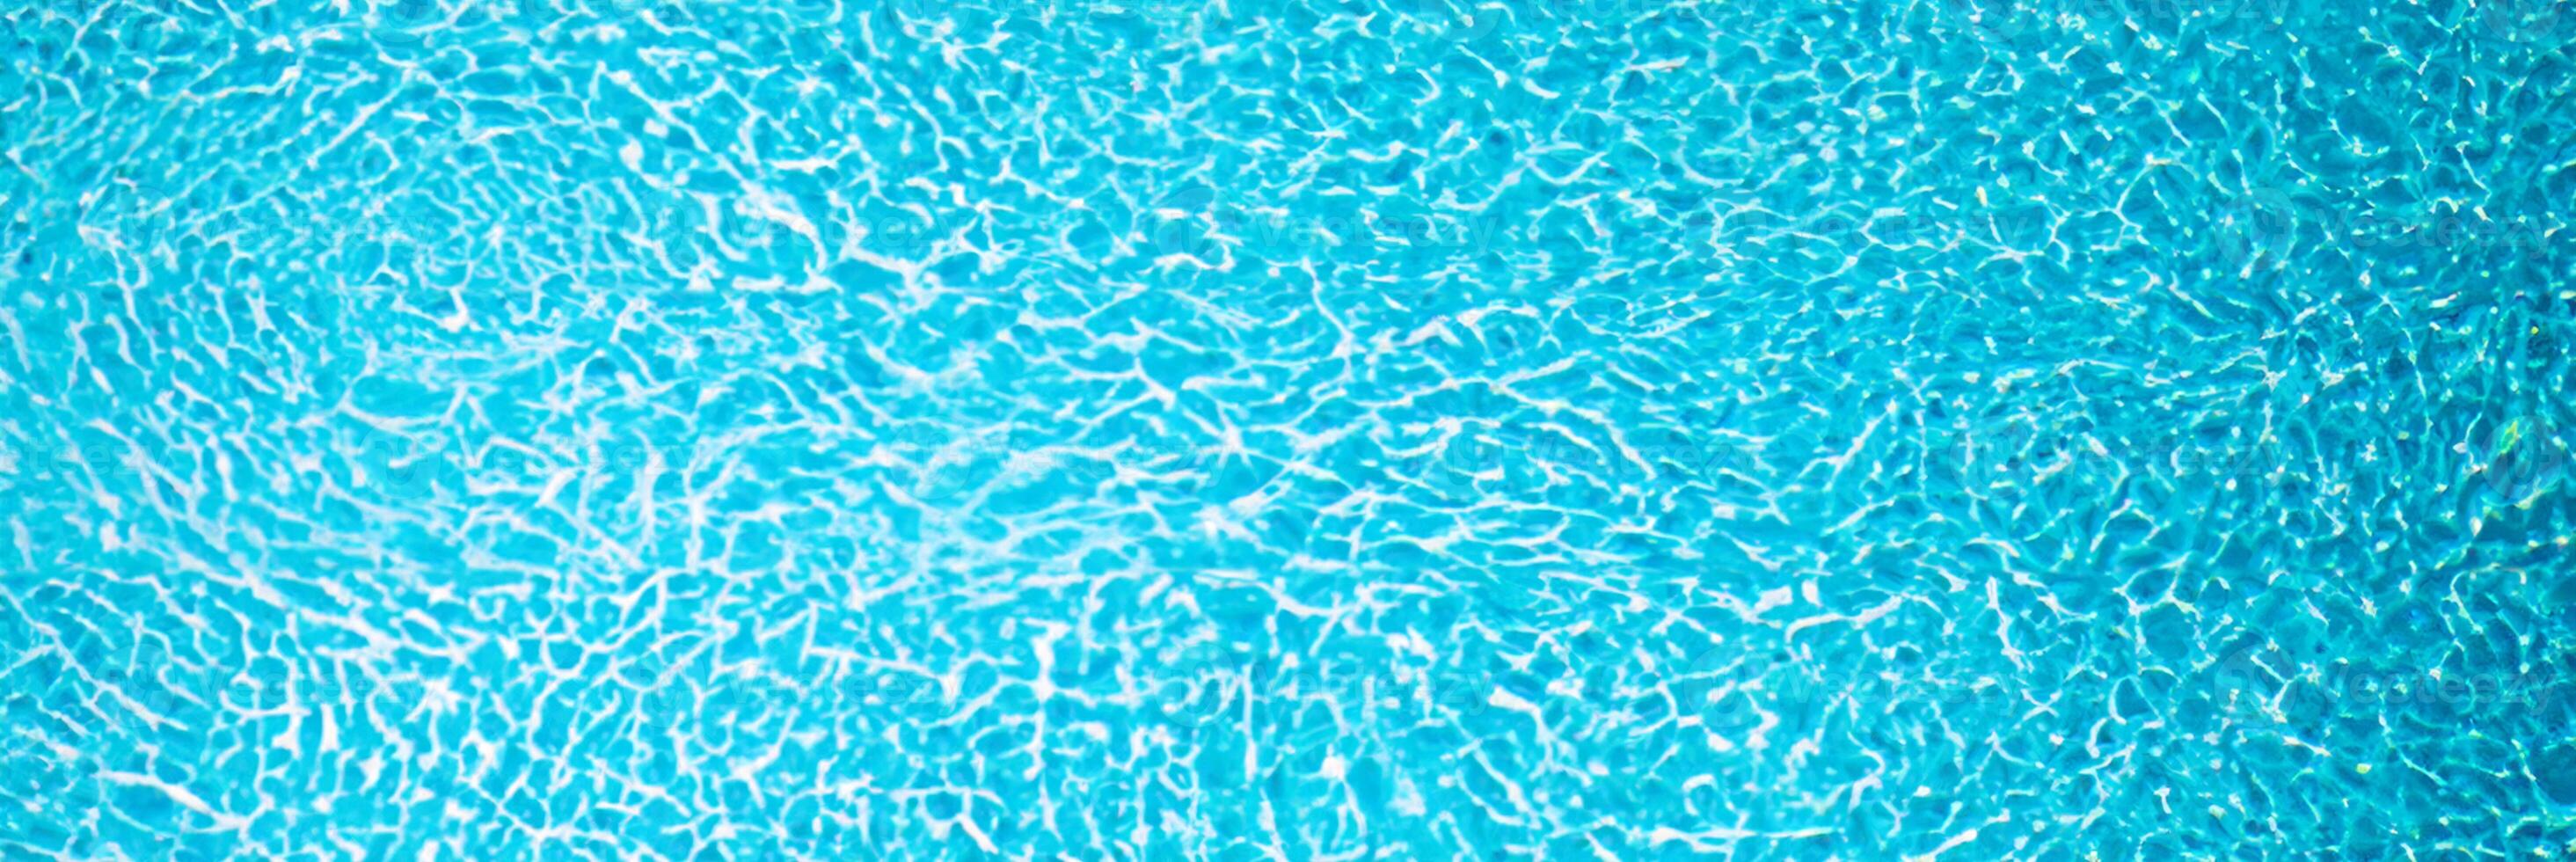 Header or background, top view of a swimming pool. photo